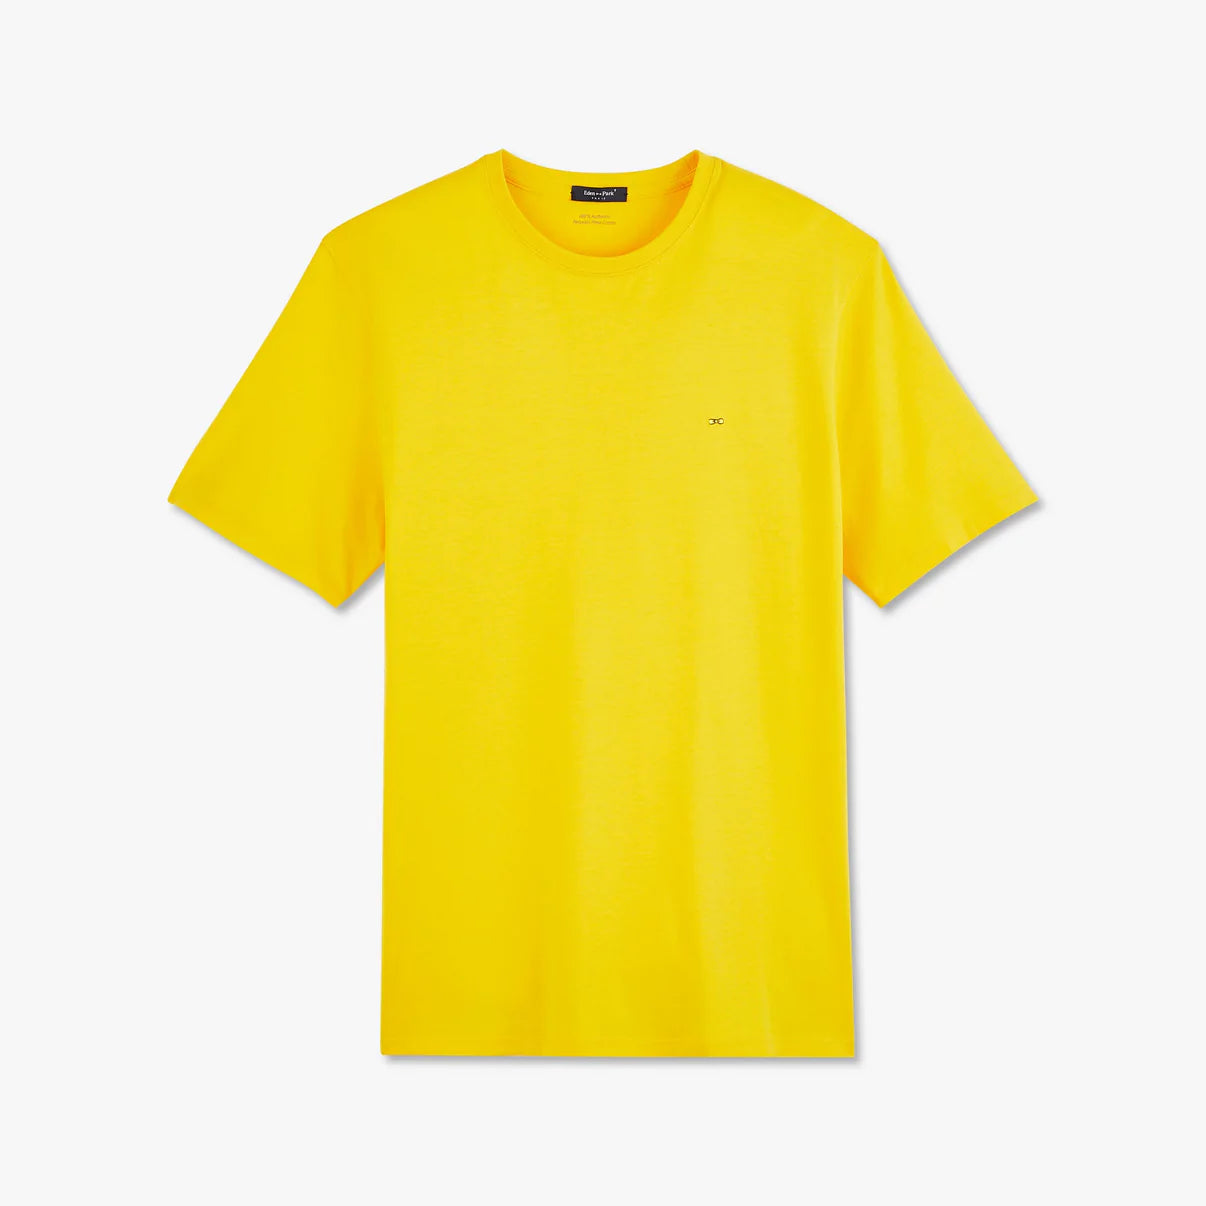 Cotton jersey t-shirt in yellow by Eden Park